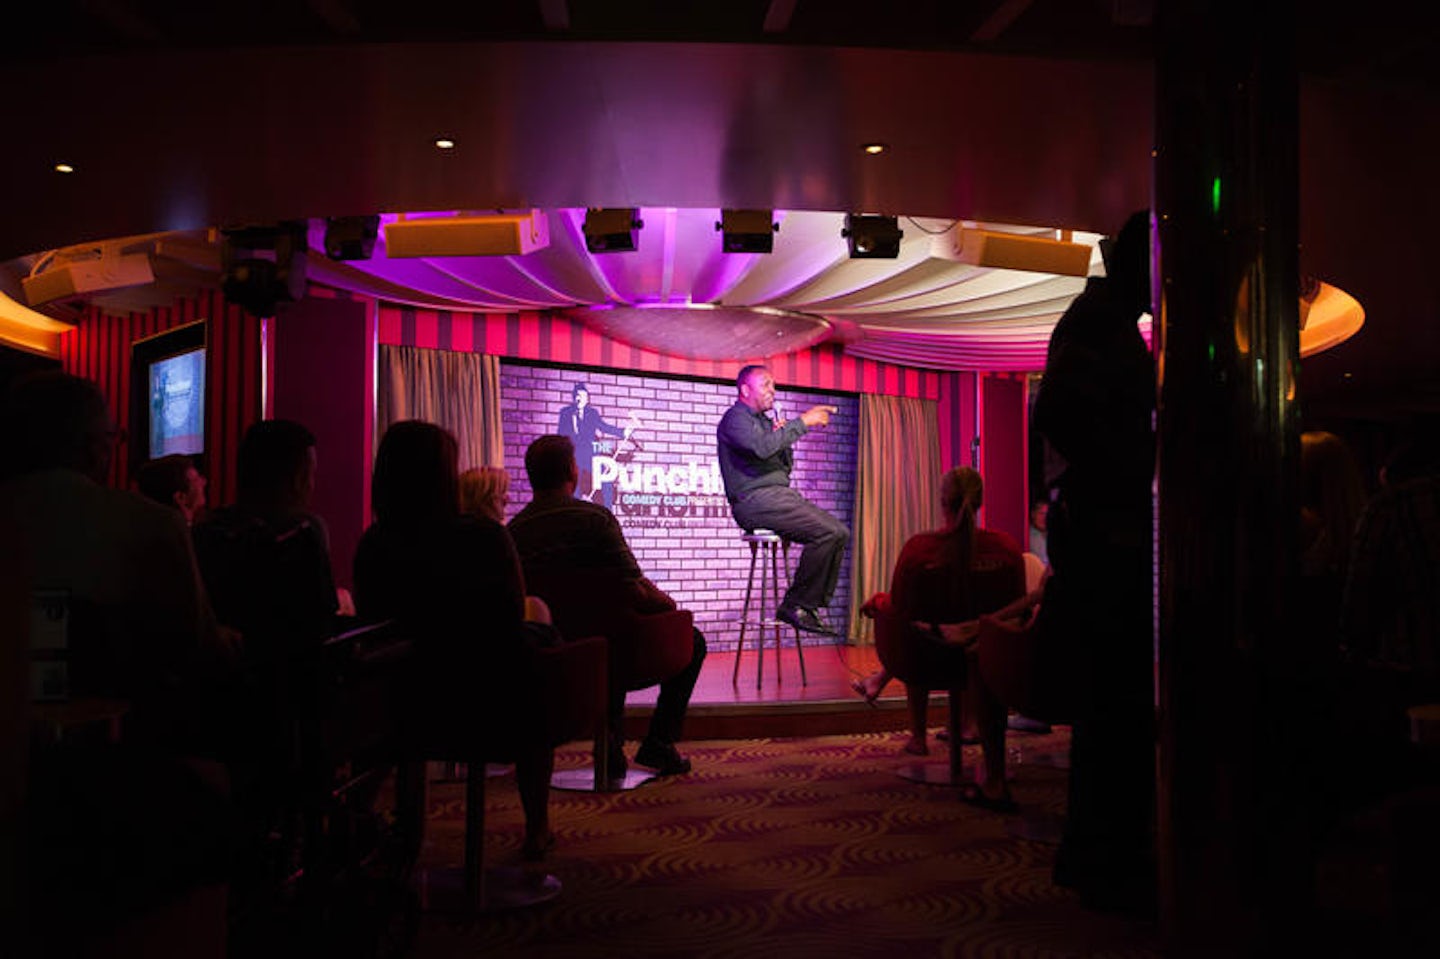 The PunchLiner Comedy Club on Carnival Sunshine